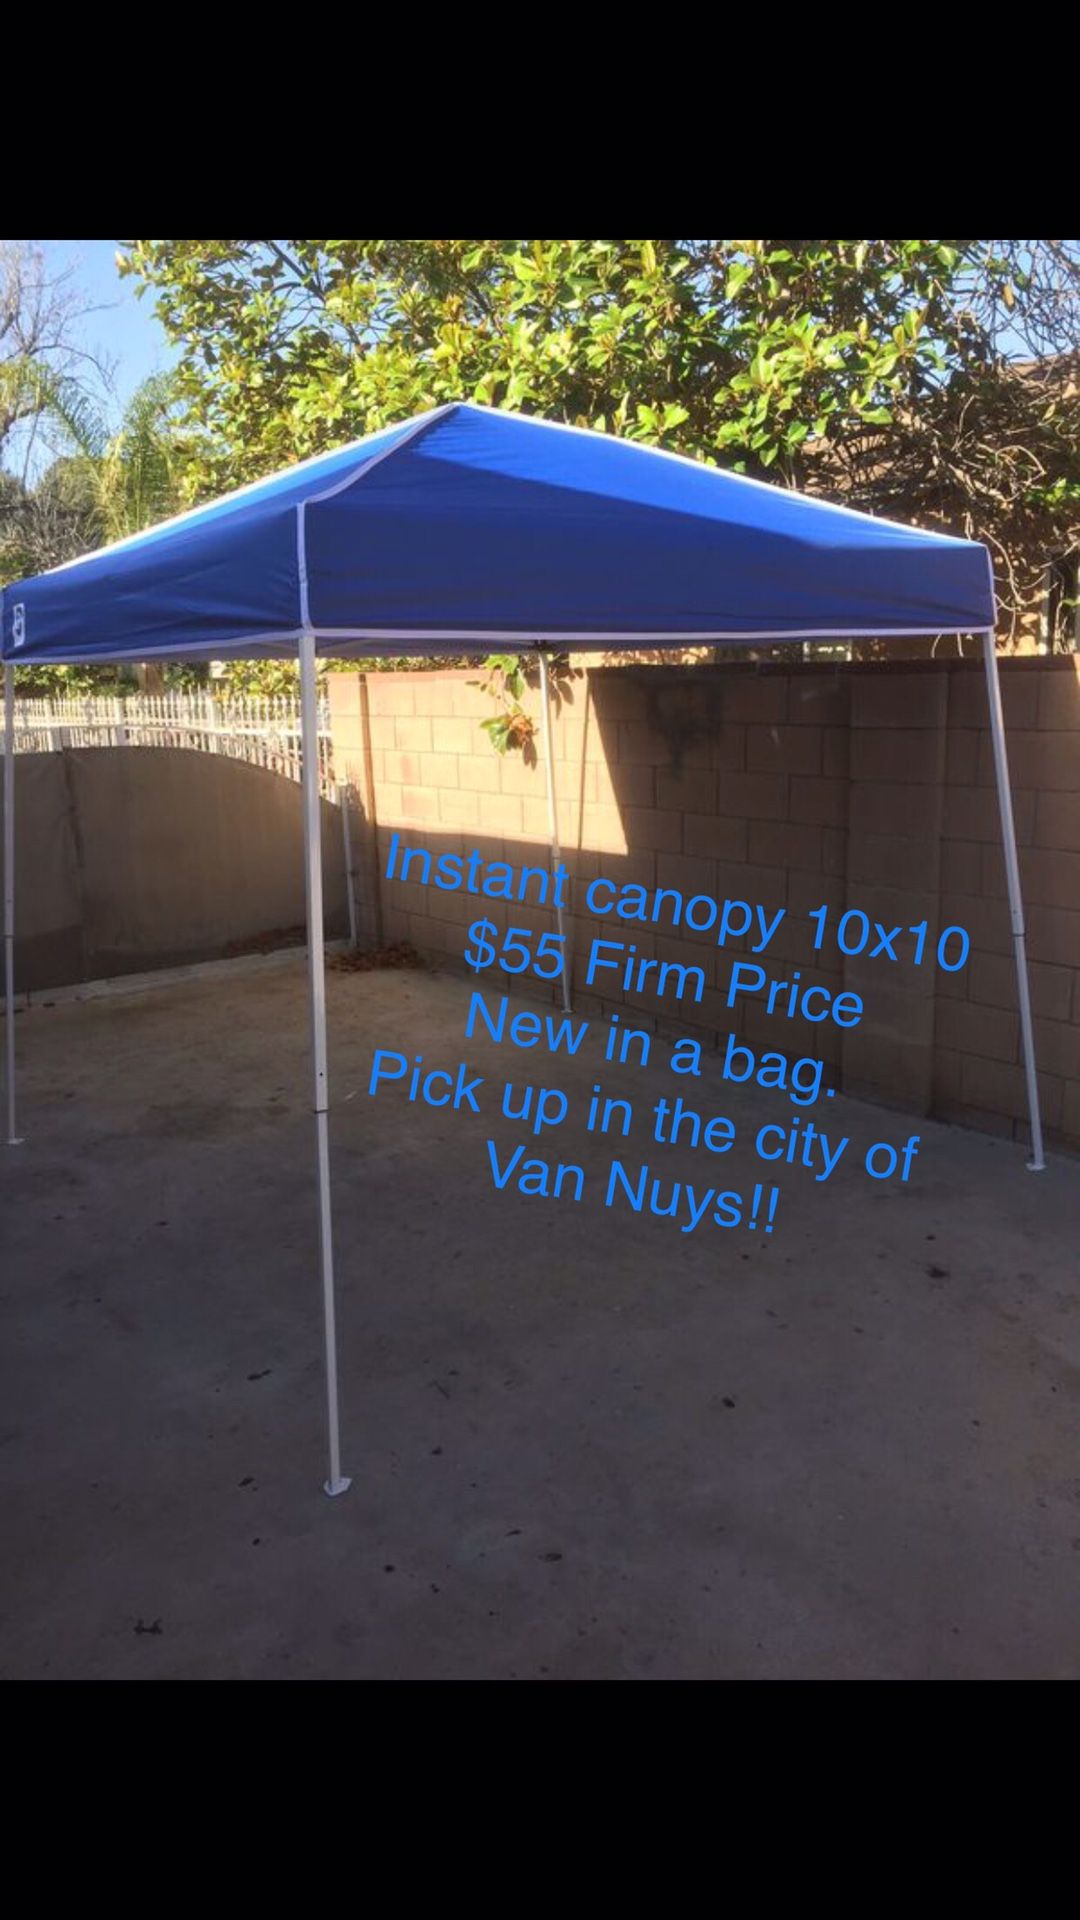 Instant Canopy 10x10 $55 Firm Price Pick Up In Van Nuys